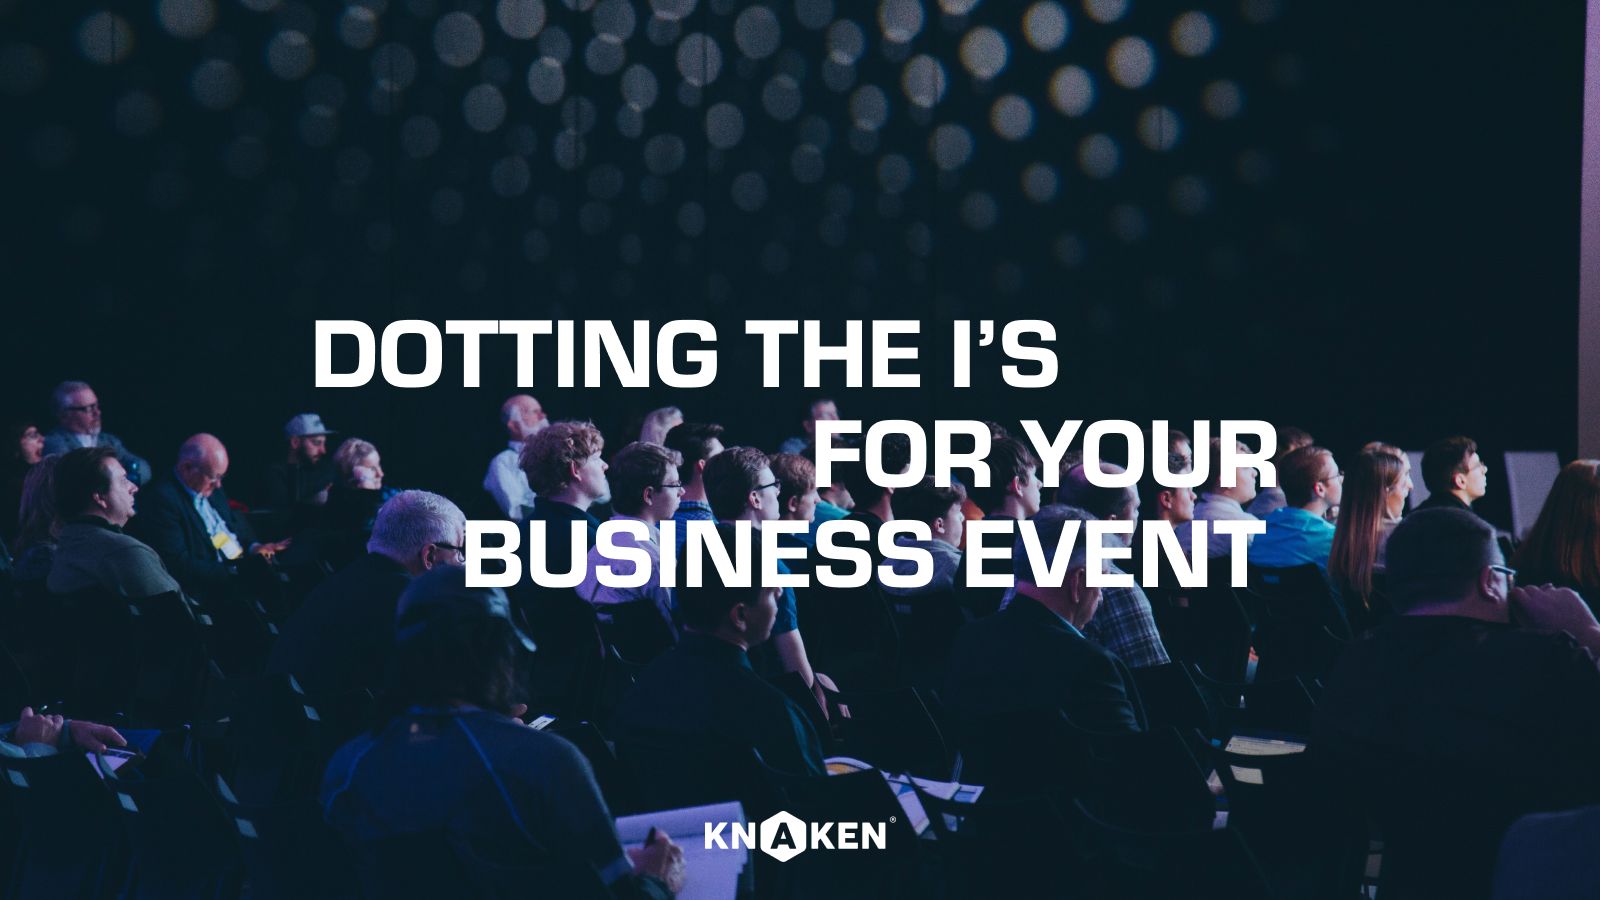 Dotting the i's for your business event